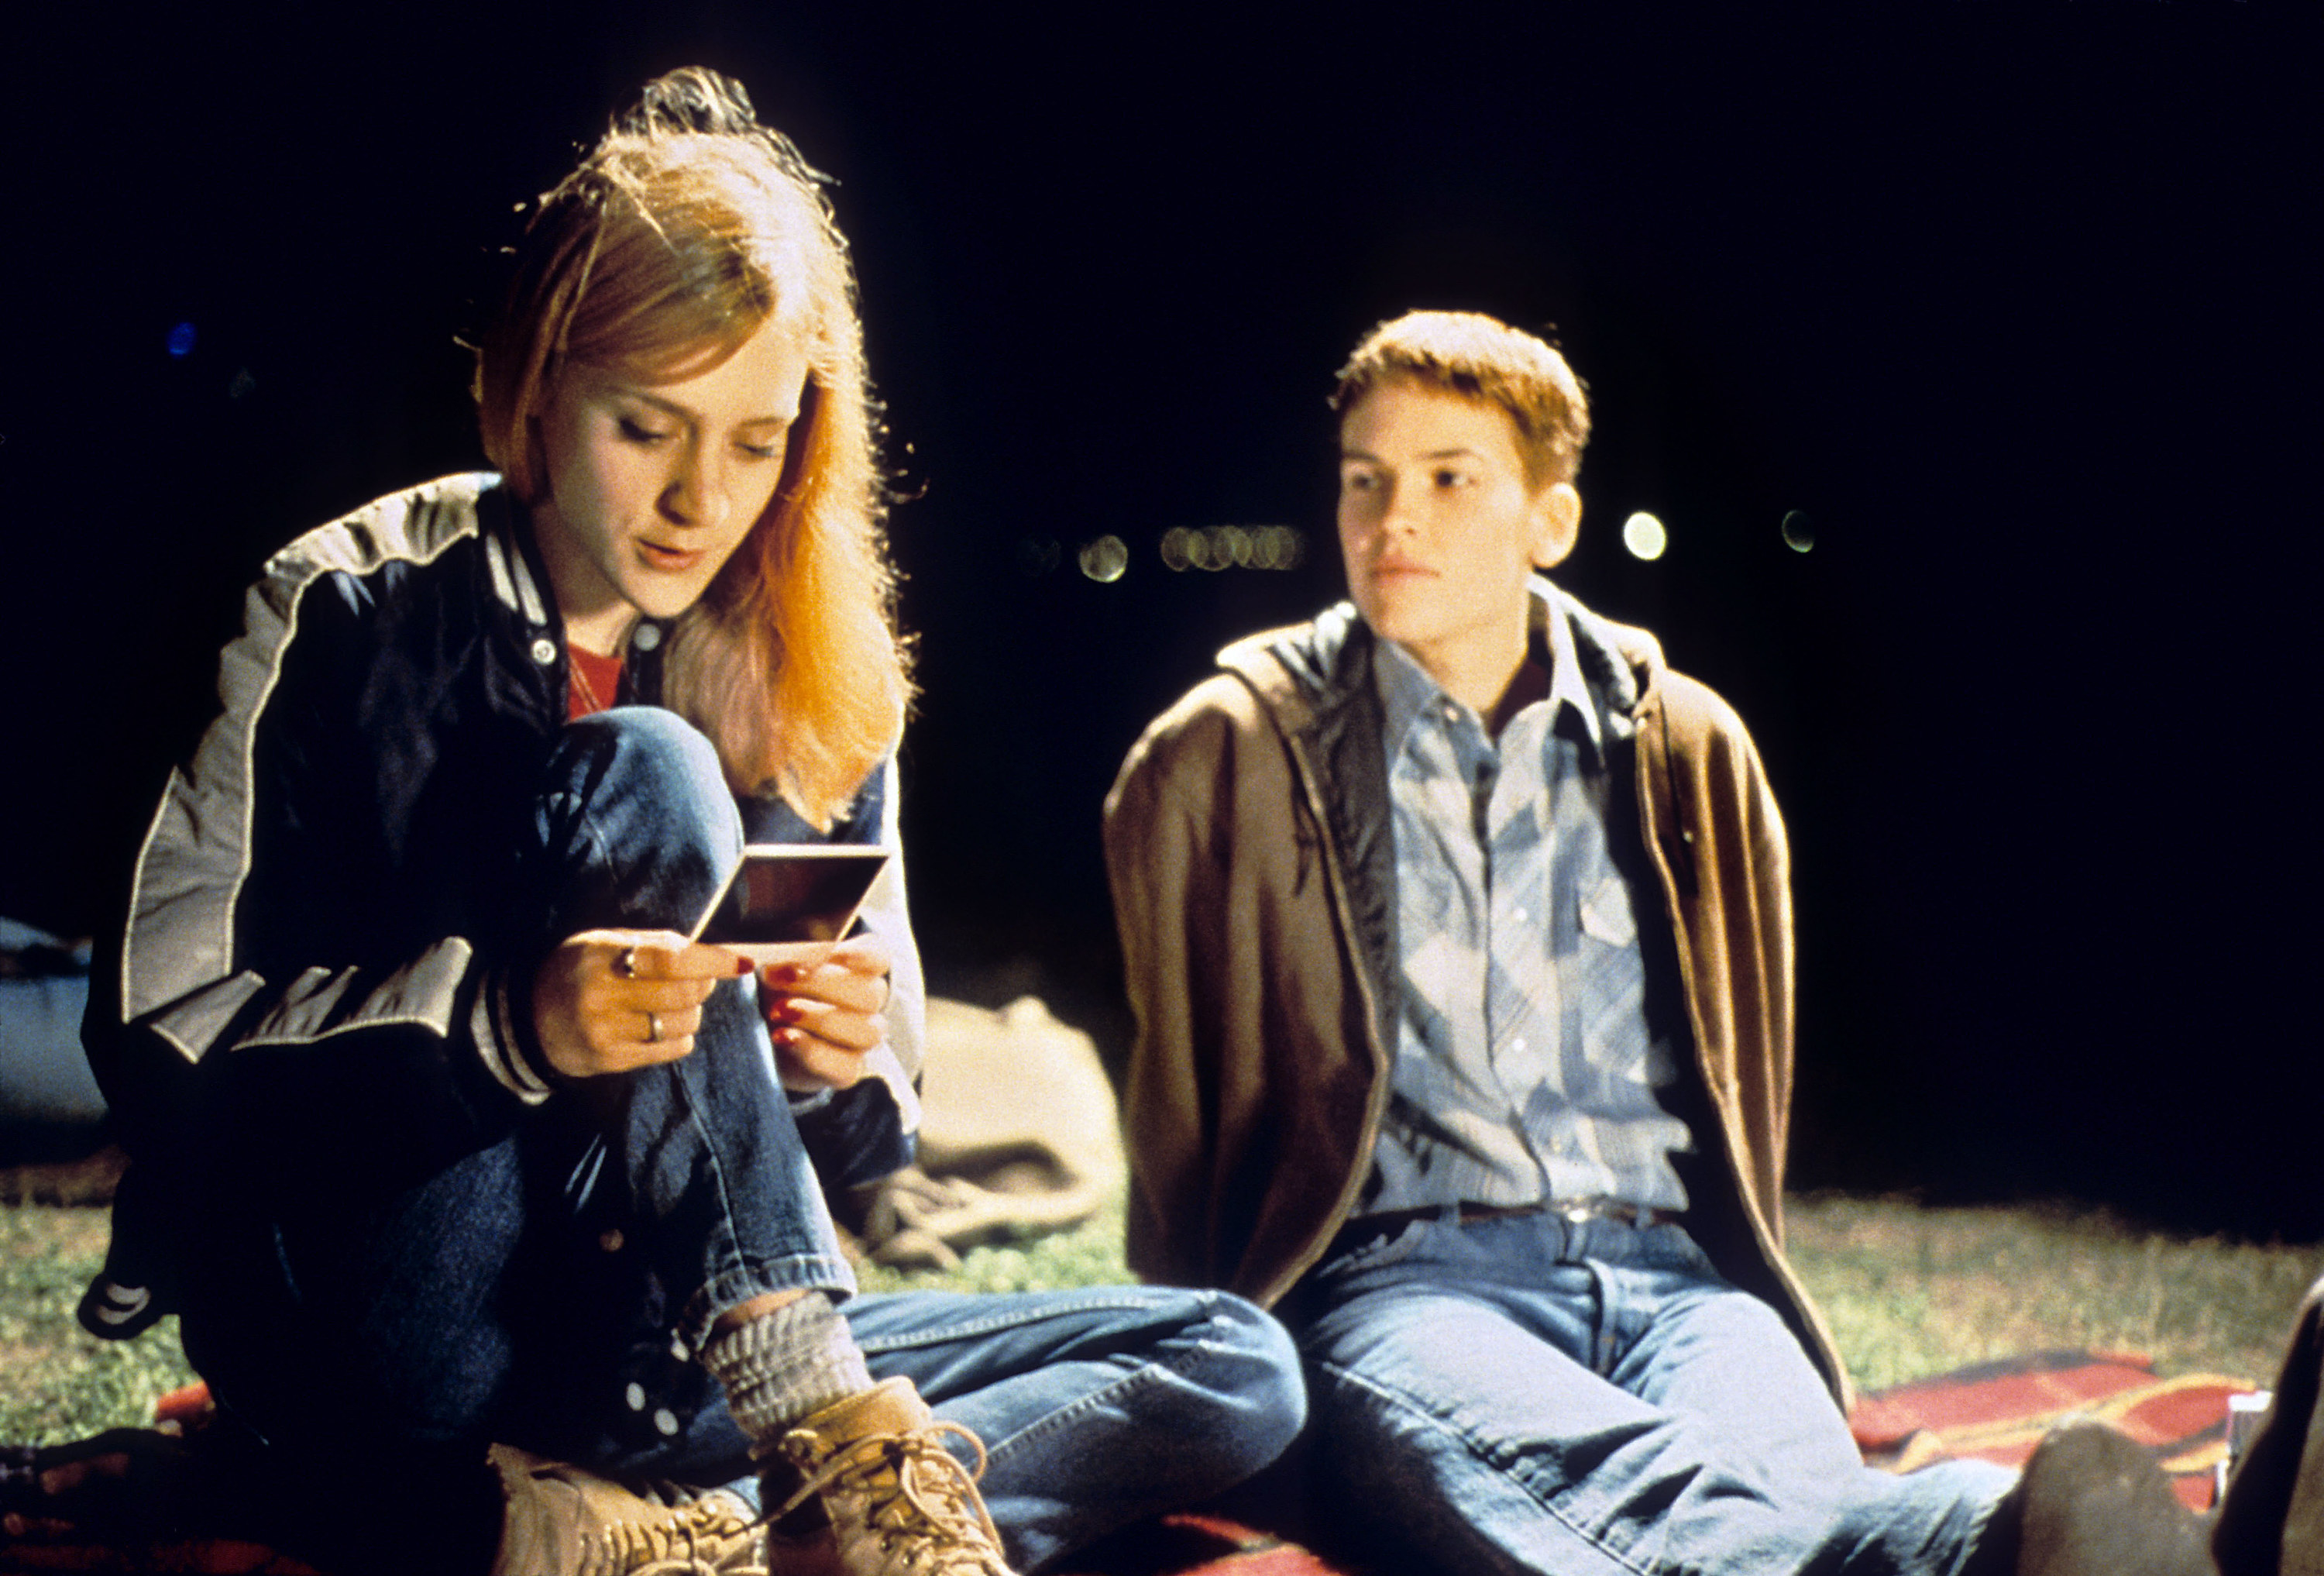 Hilary Swank sitting next to a teenage girl on the grass